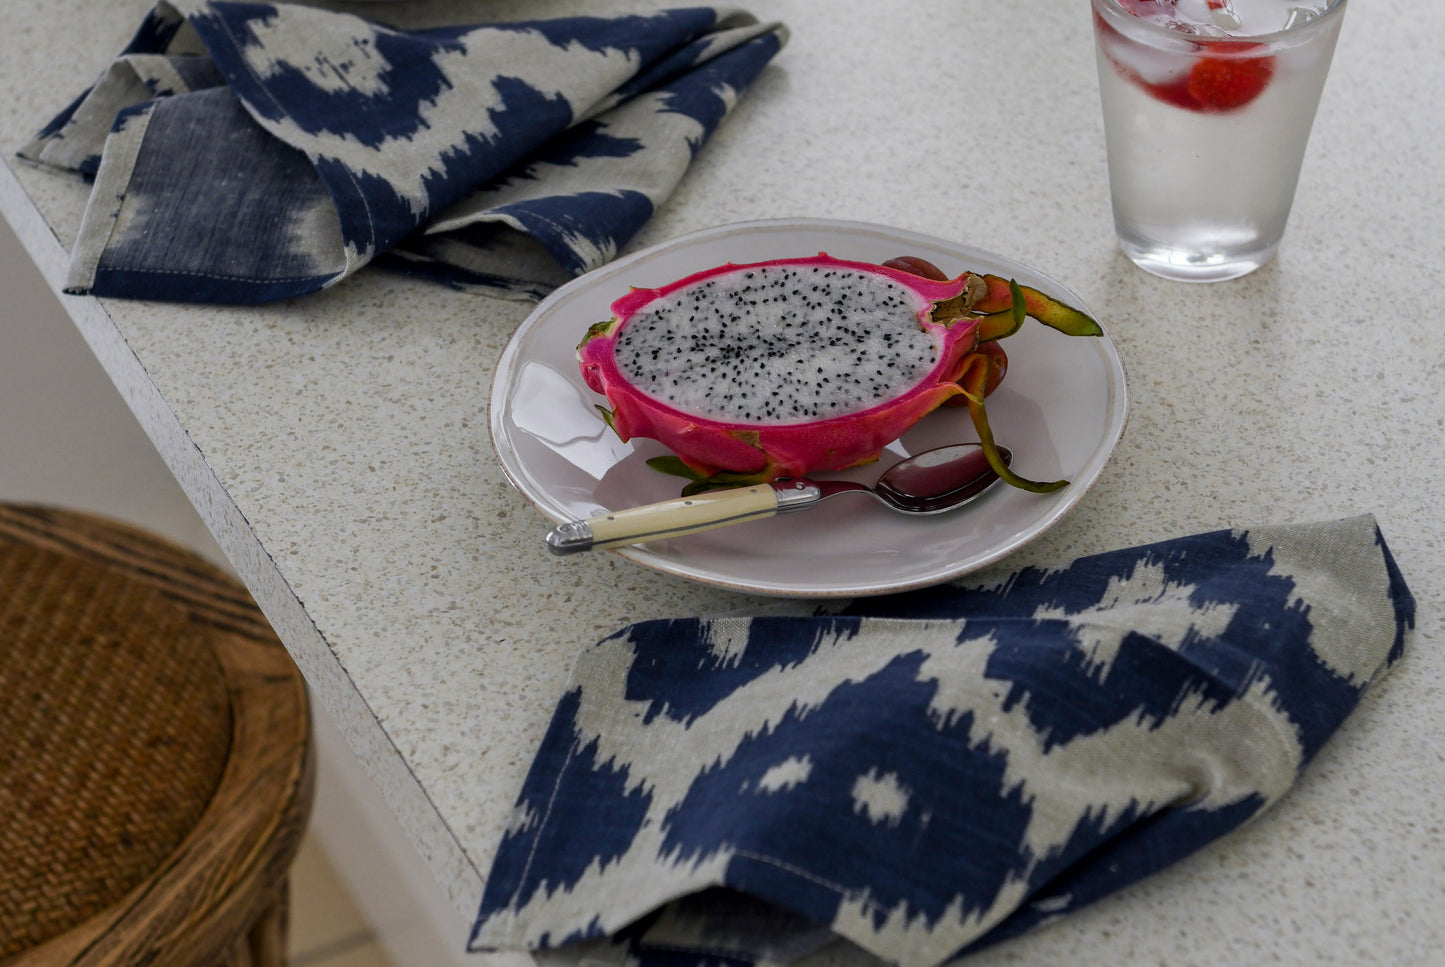 Lifestyle Ikat Cloth Napkins in navy blue